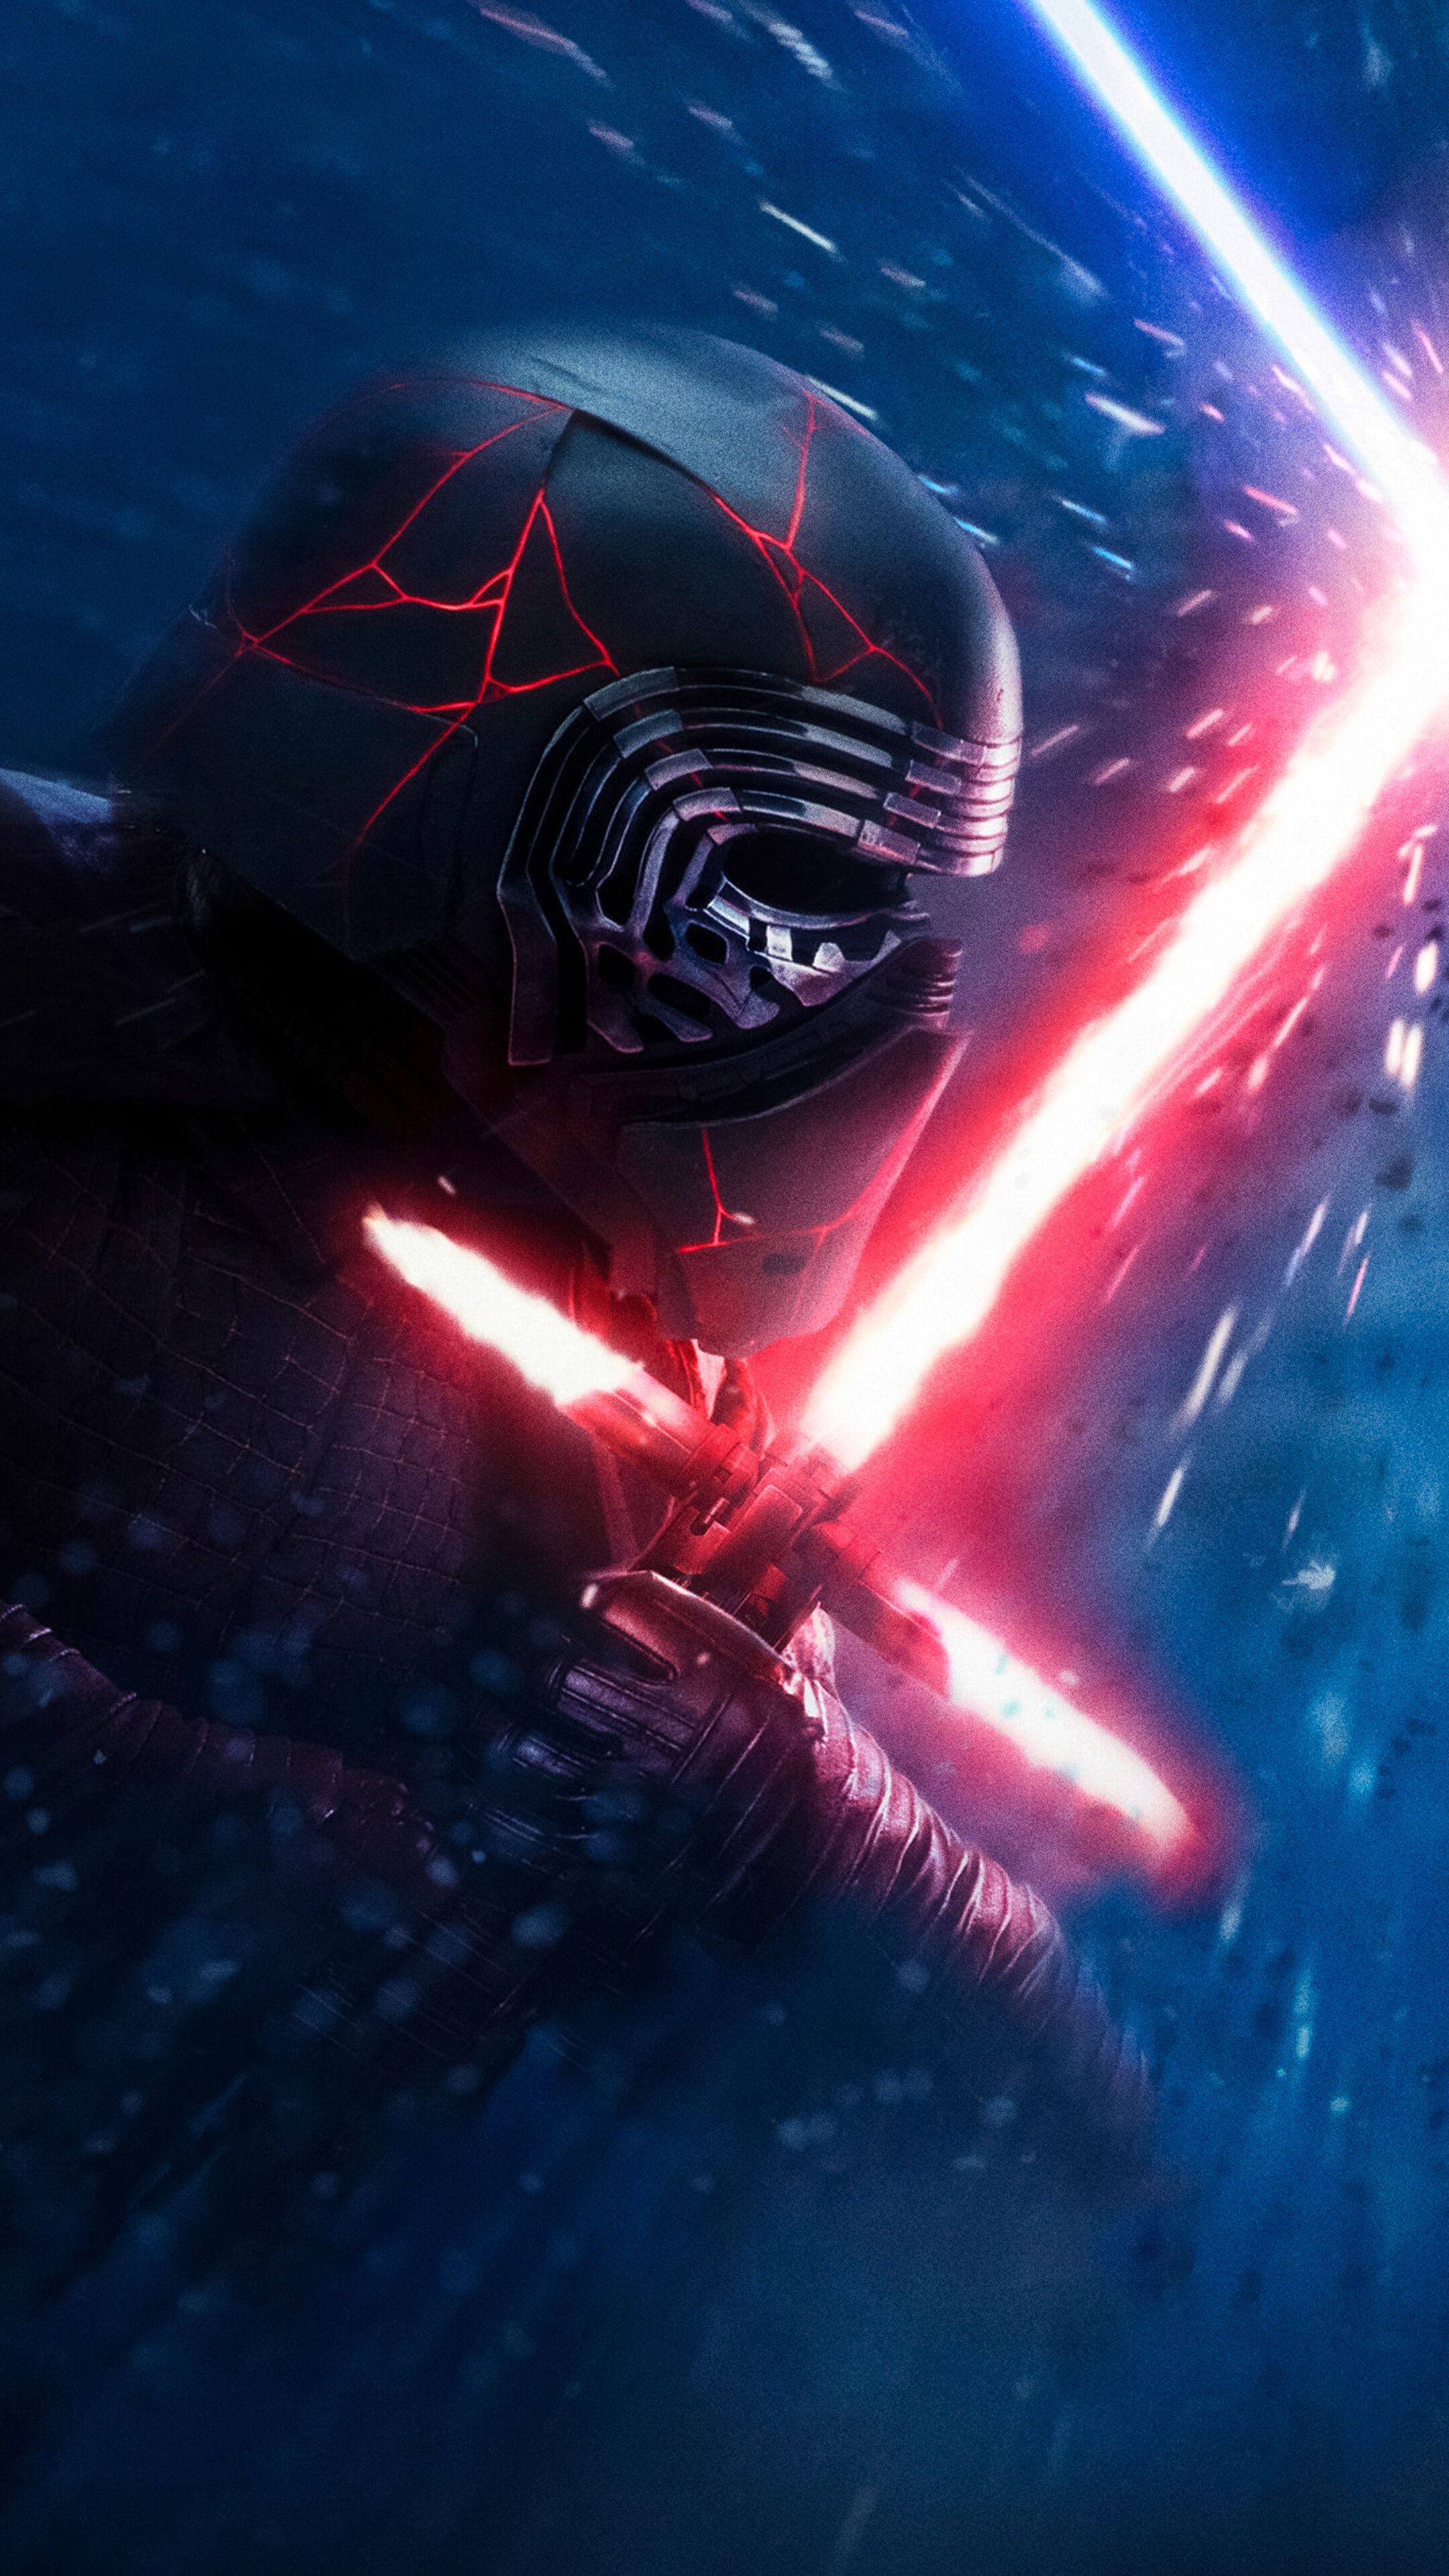 Kylo Ren, Lightsaber, Star Wars The Rise of Skywalker, 4K phone HD Wallpaper, Image, Background, Photo and Picture. Mocah HD Wallpaper